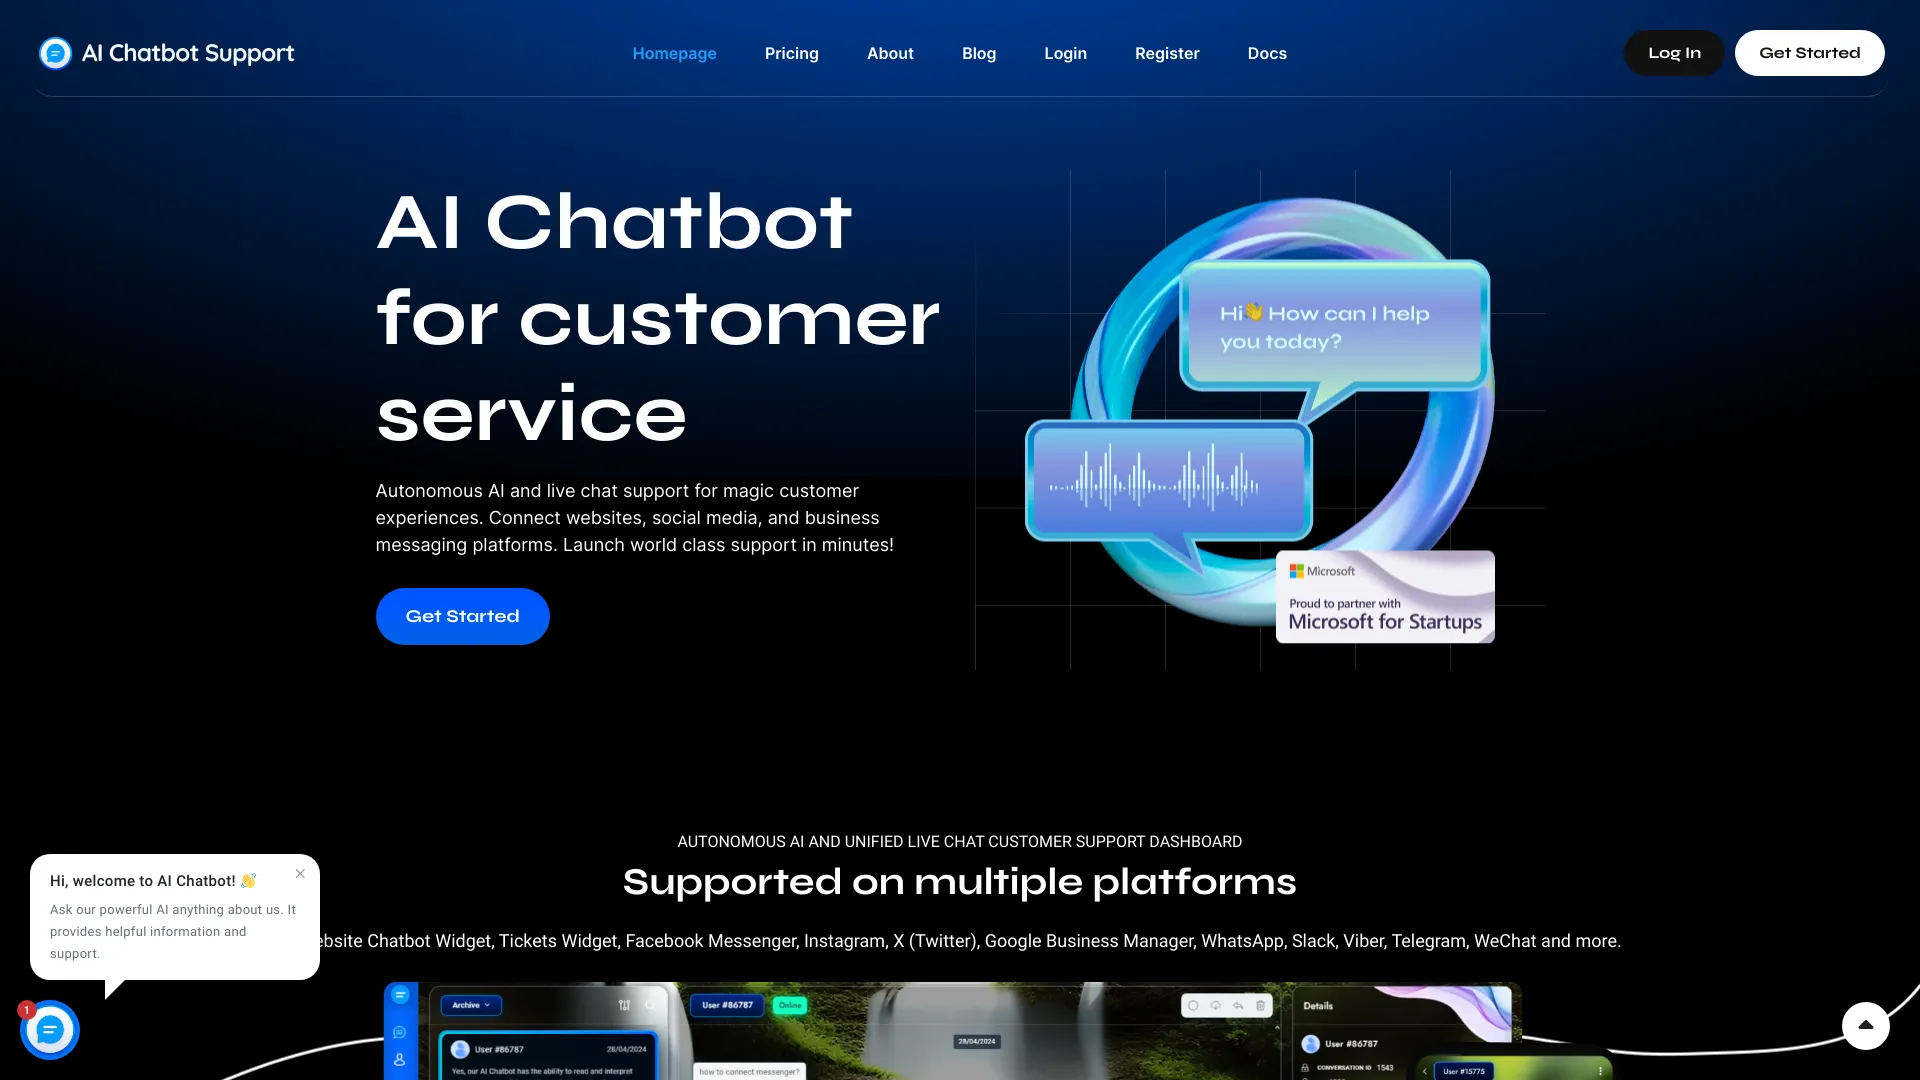 AI Chatbot Support